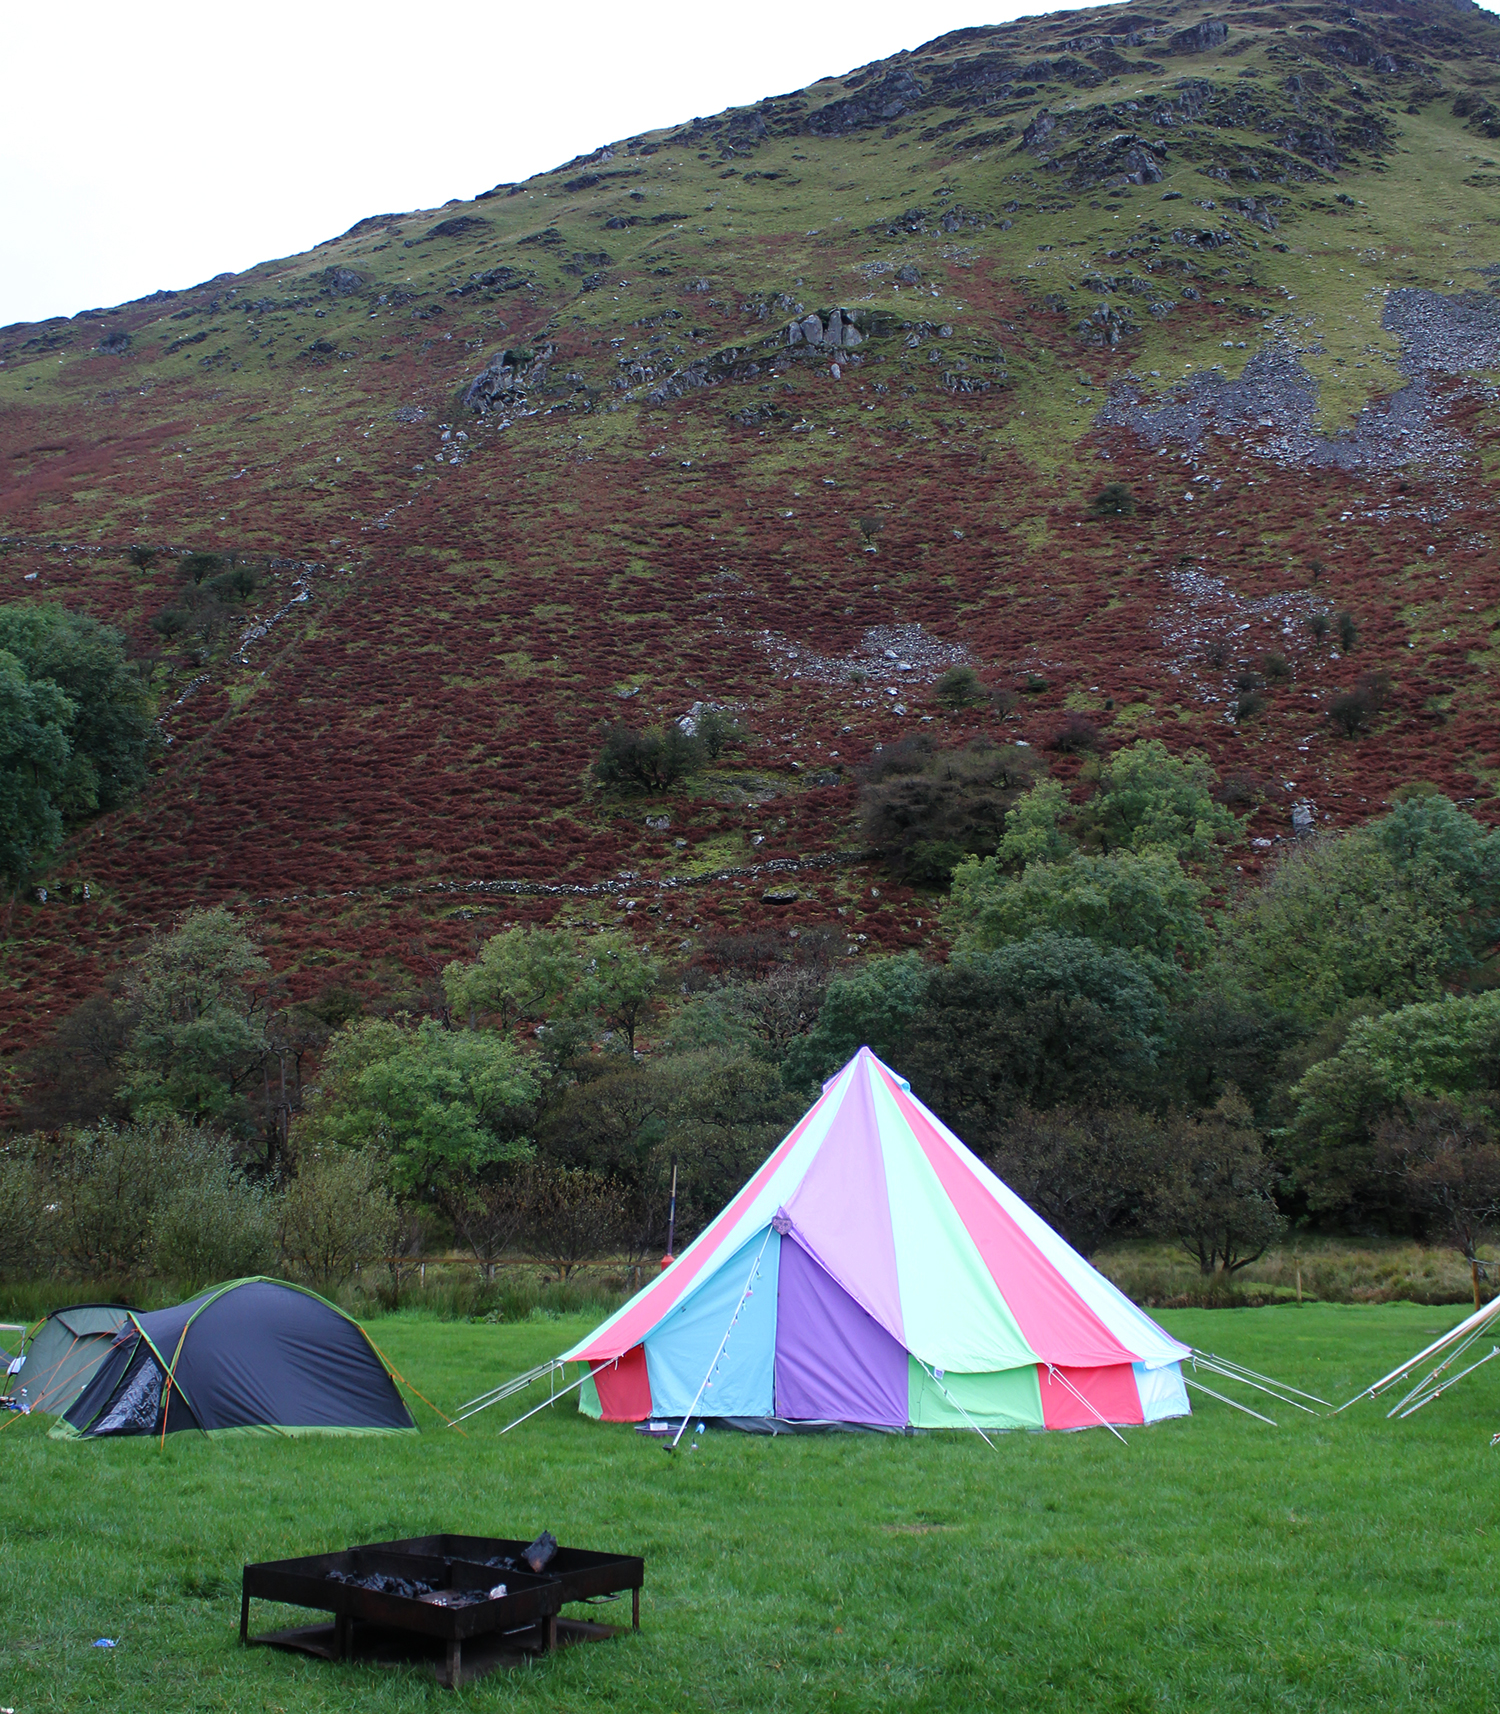 Llyn Gwynant campsite in Snowdonia, read our detailed picture review